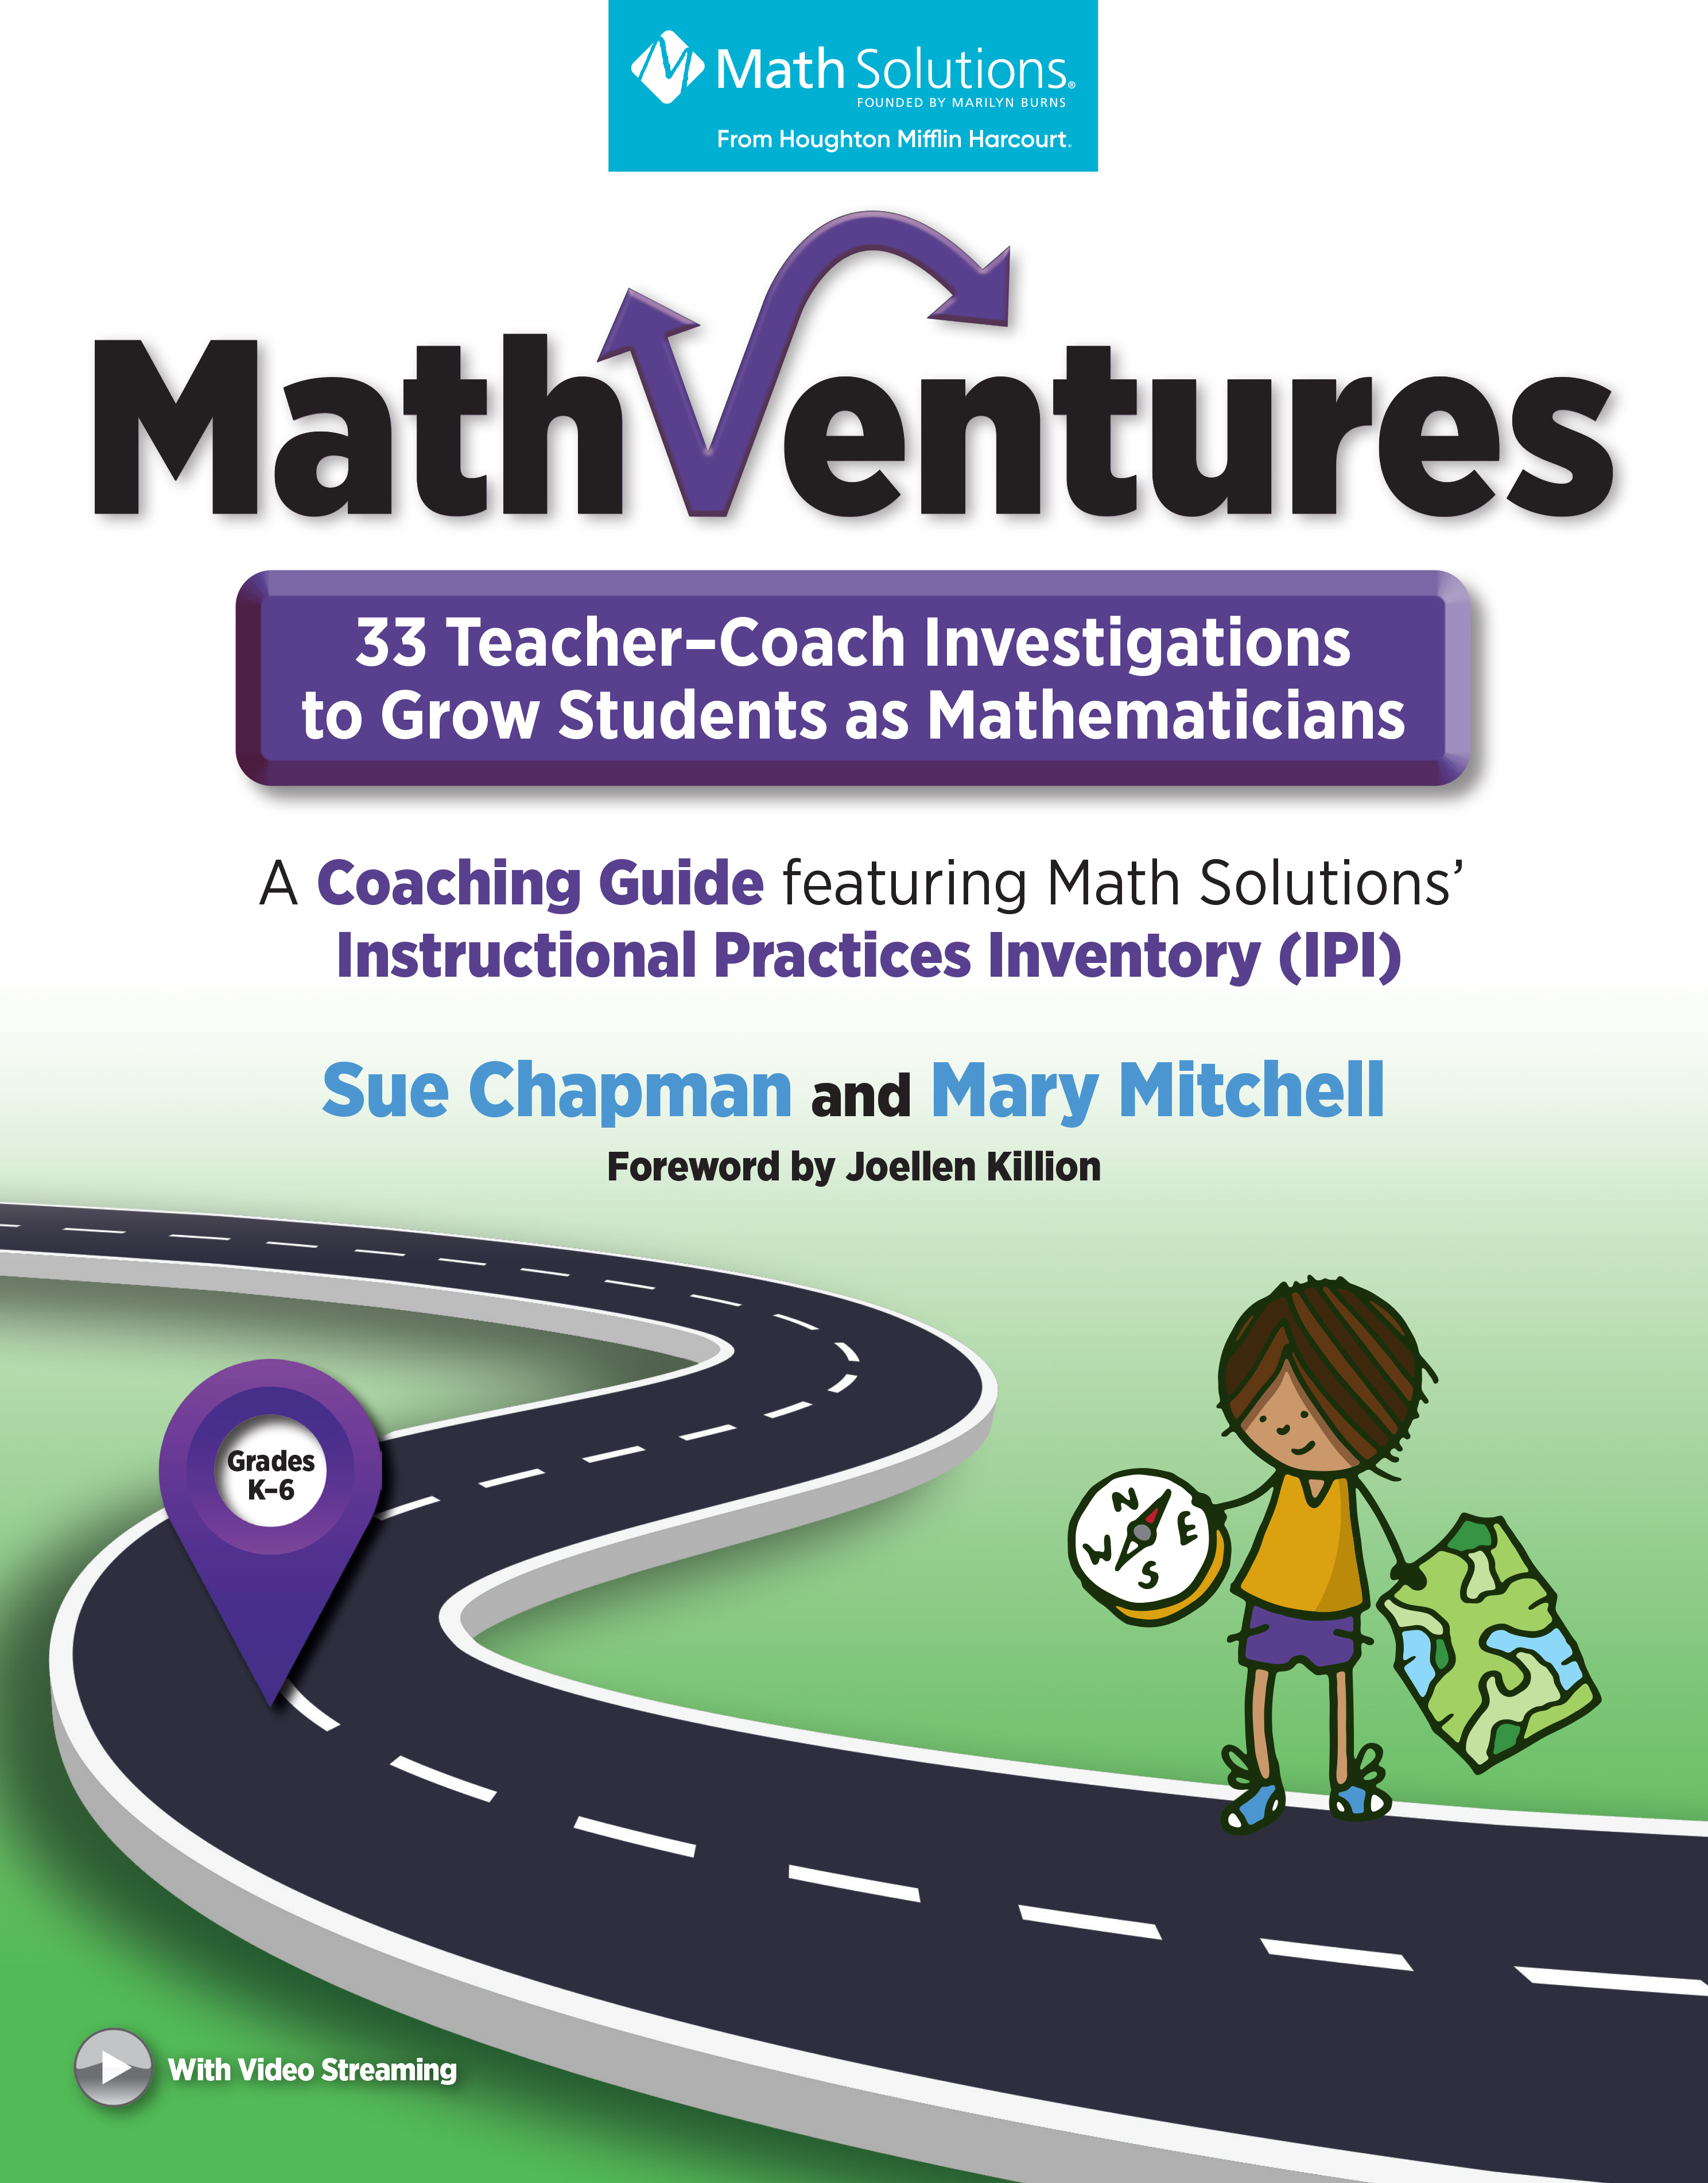 MathVentures: 33 Teacher&ndash;Coach Investigations to Grow Students as Mathematicians, A Coaching Guide featuring &rsquo;Instructional Practices Inventory (IPI)-9781935099918